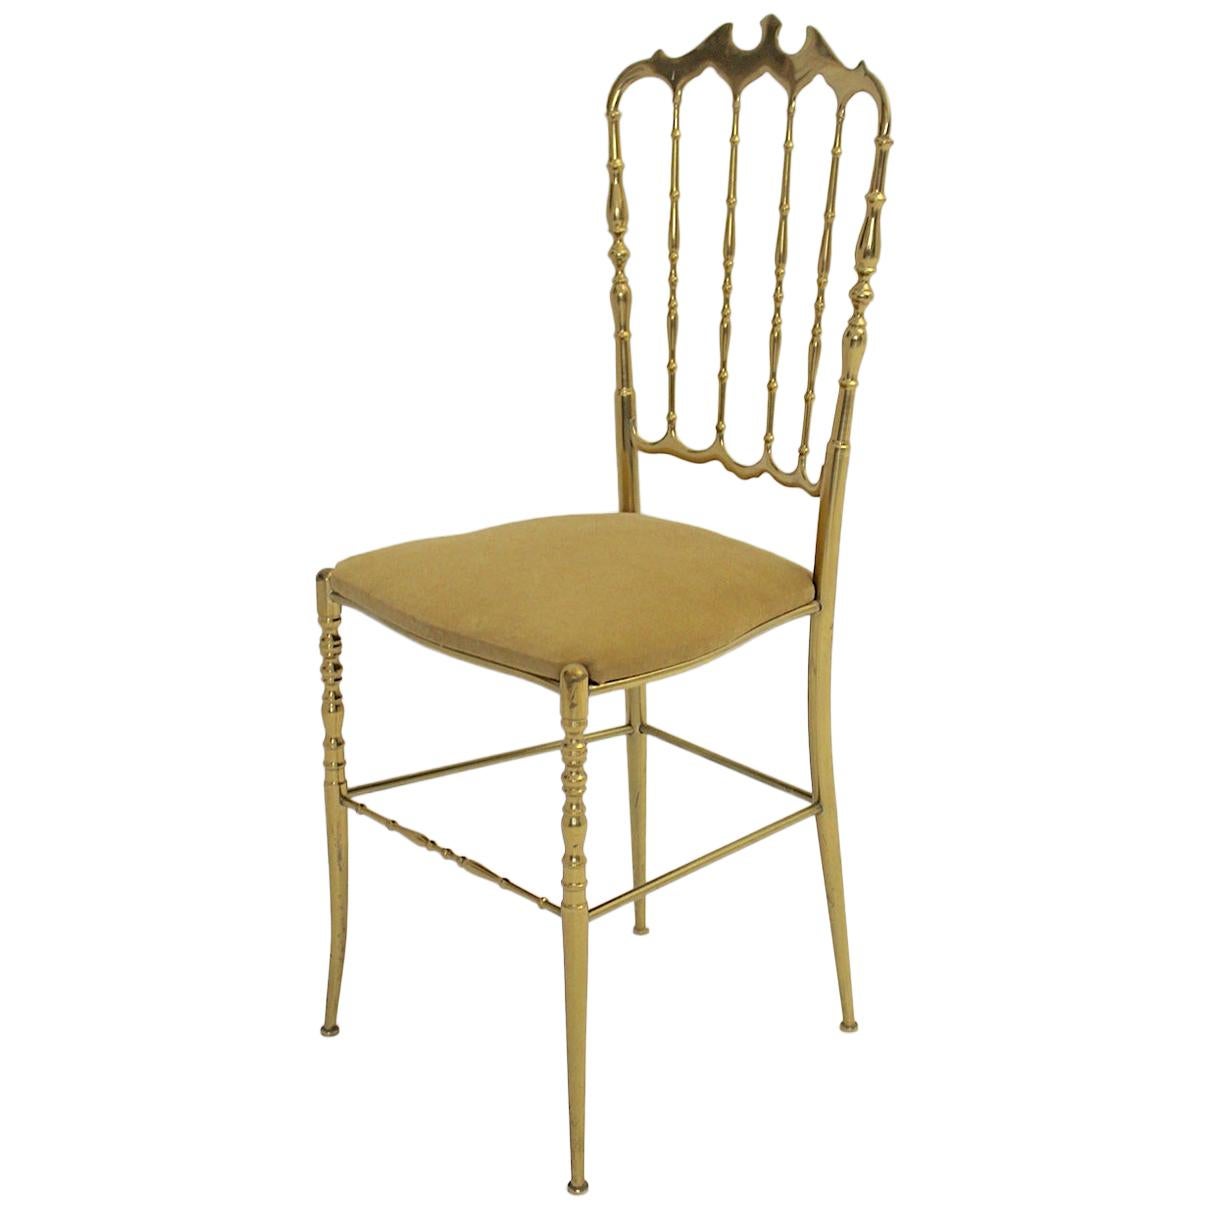 Mid-Century Modern Vintage Chiavari Brass Side Chair or Chair, 1950s, Italy